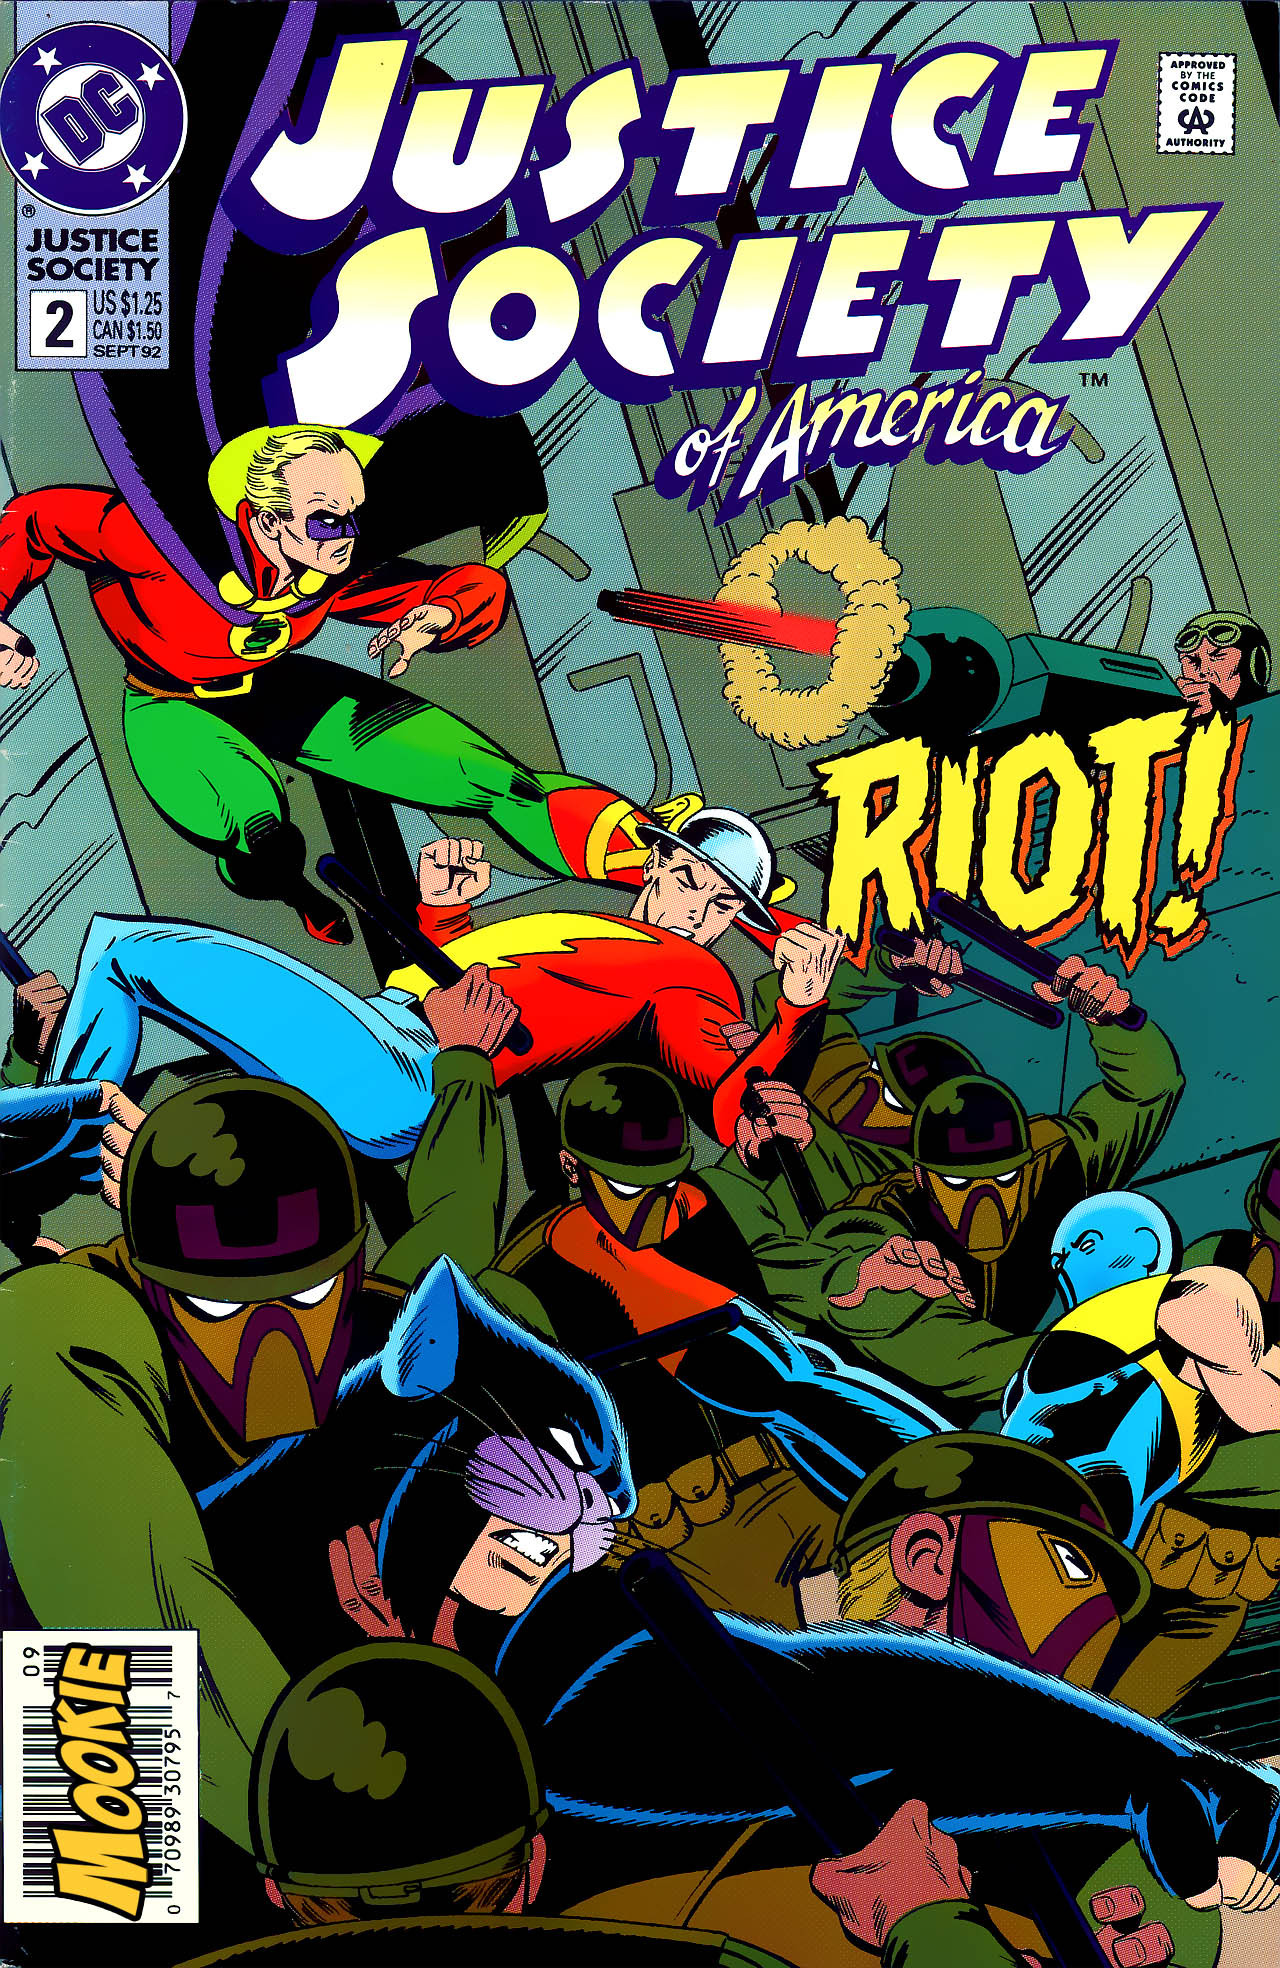 Read online Justice Society of America (1992) comic -  Issue #2 - 1